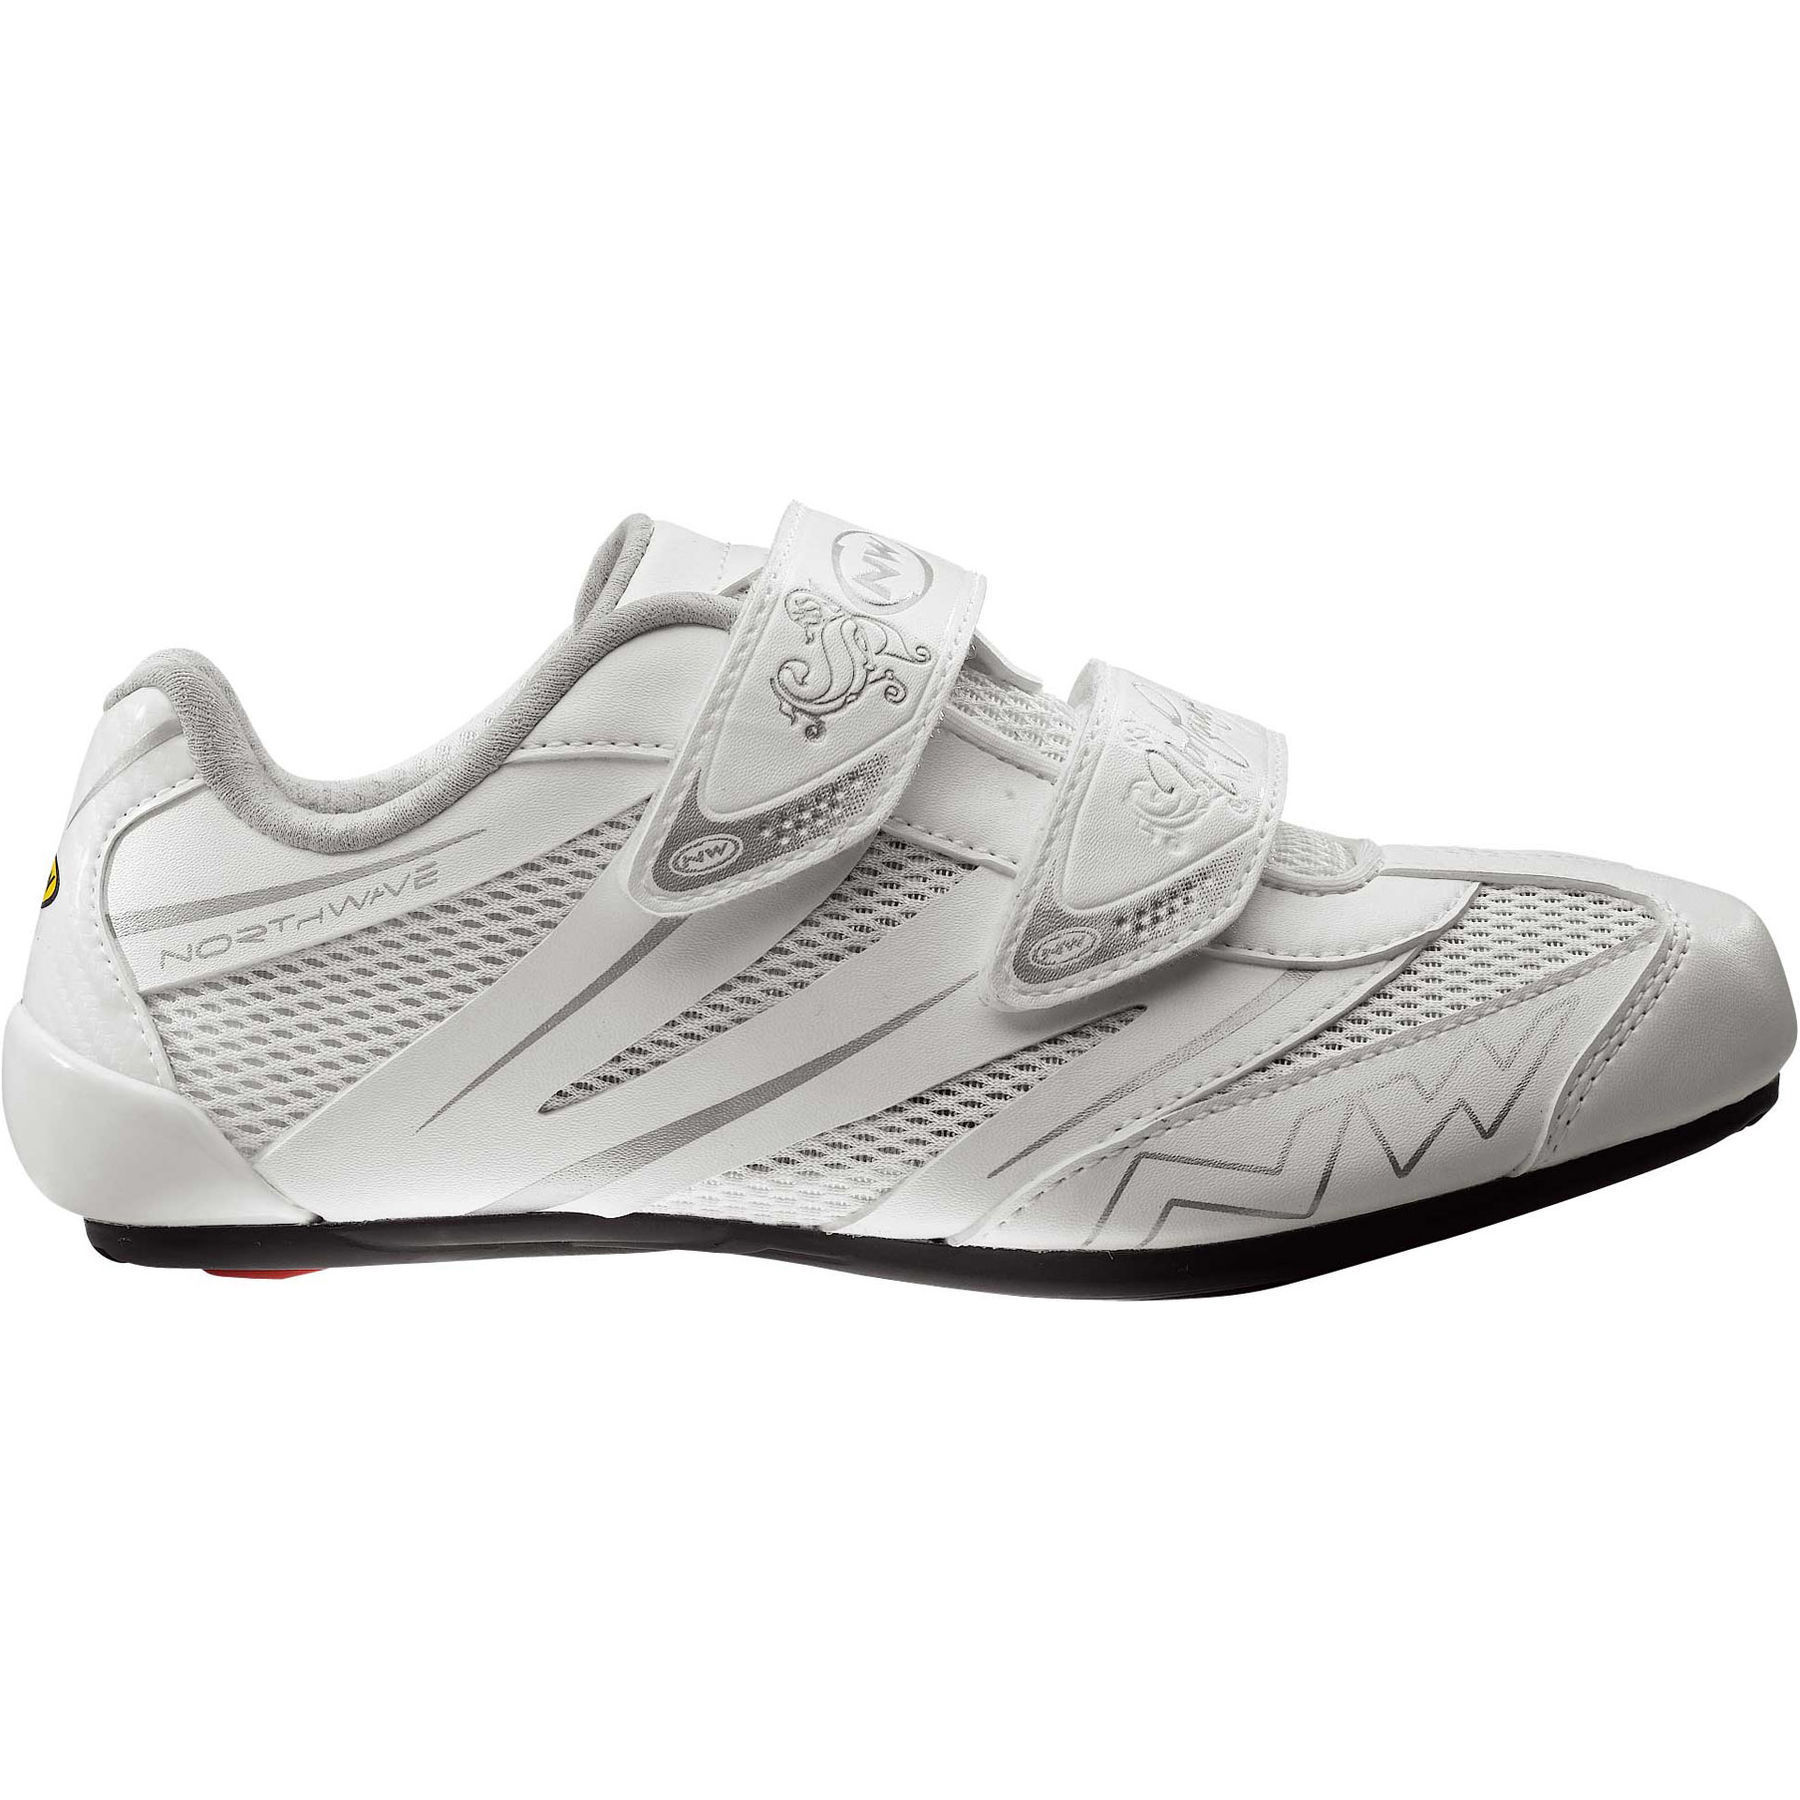 Northwave Eclipse Womens Road Cycling Shoe White Silver Size 42.5